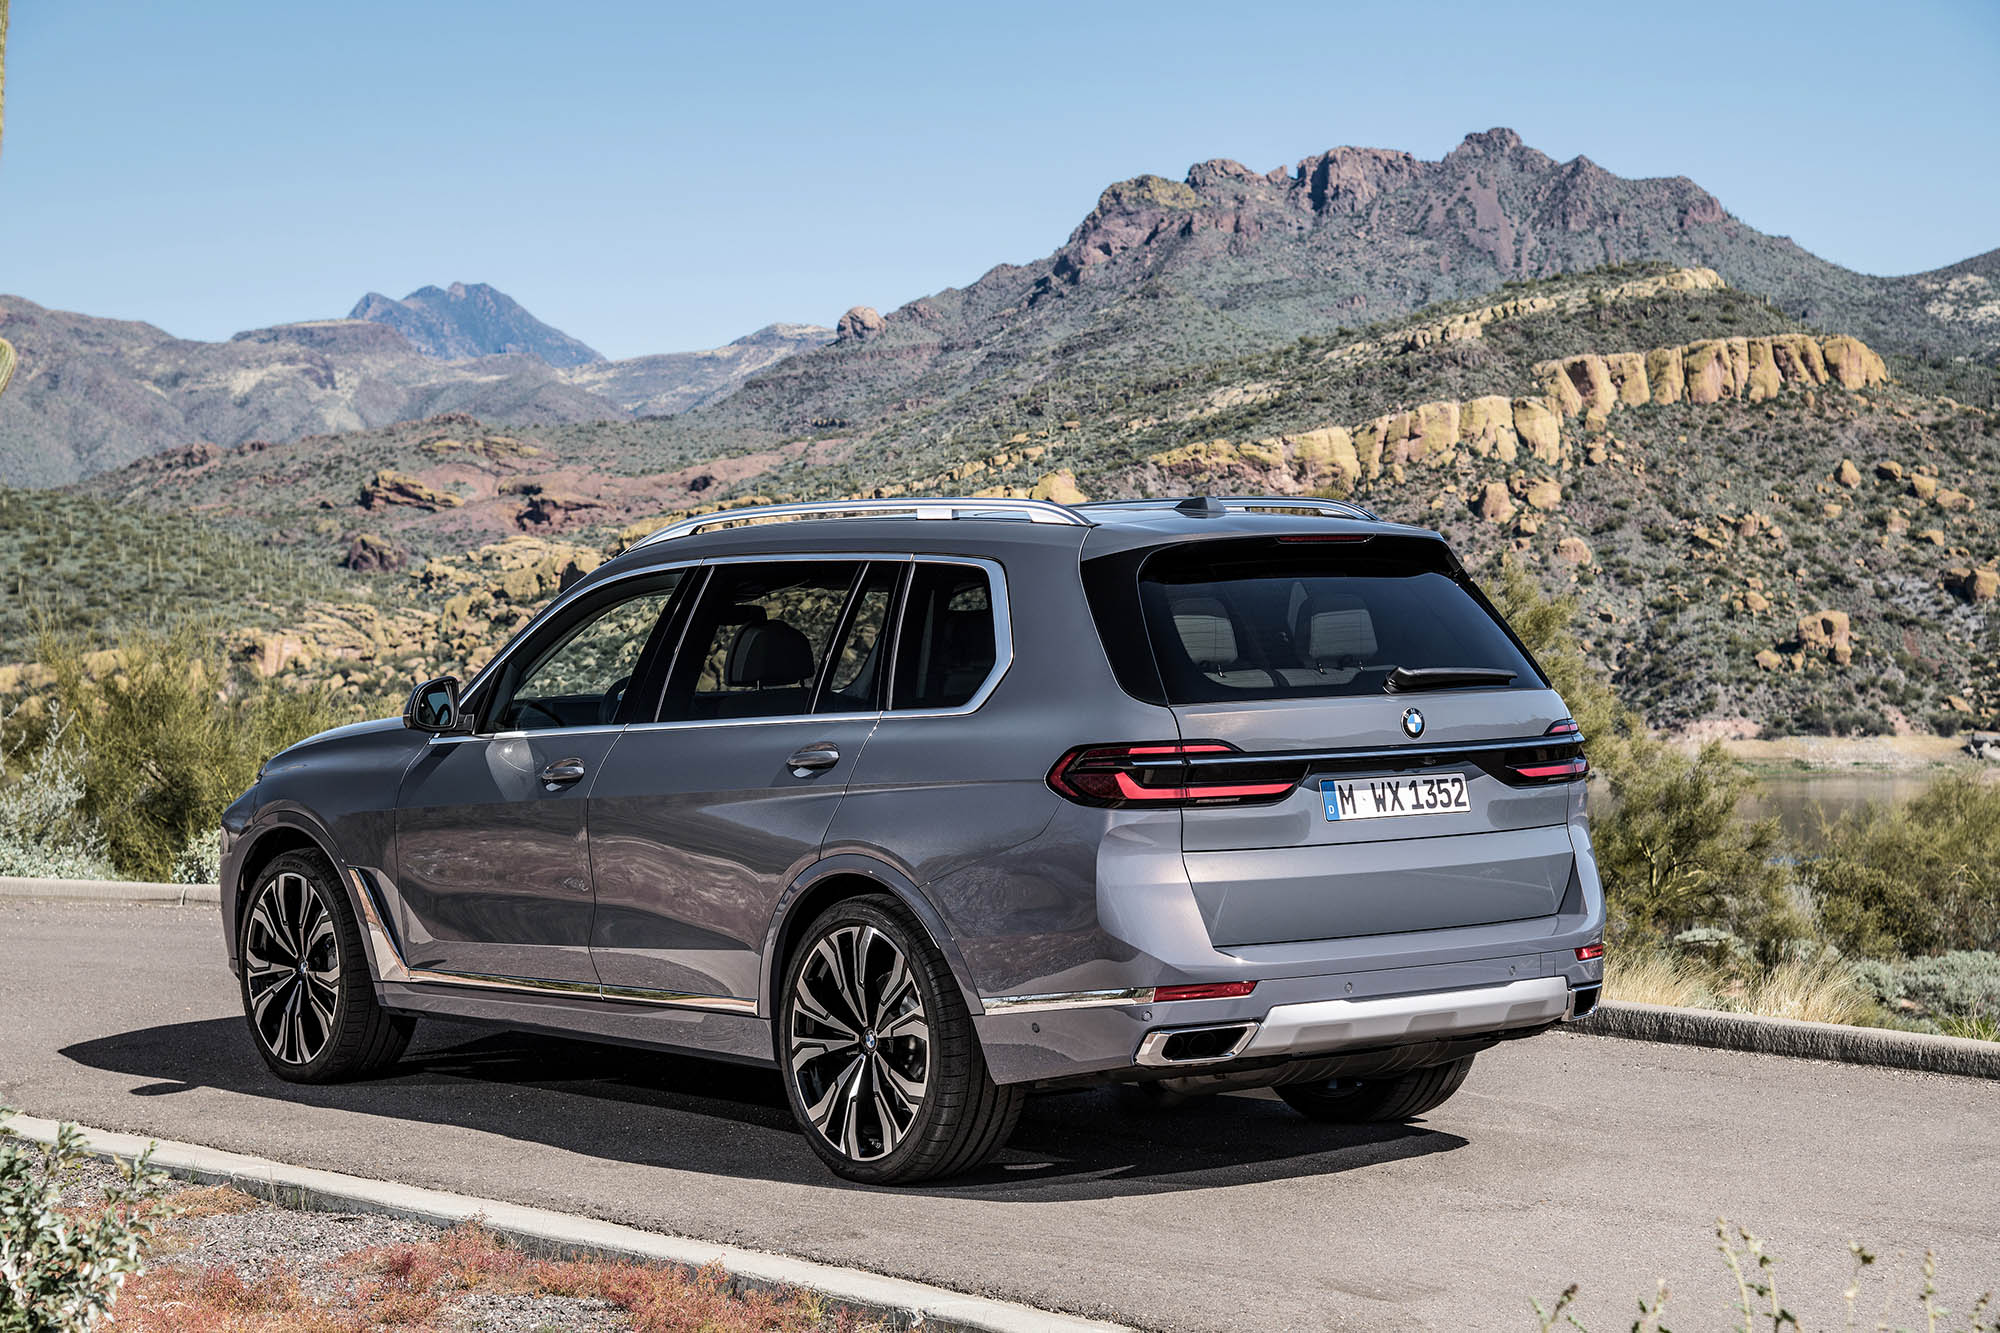 2023 BMW X7 xDrive40i in silver, parked in the desert.